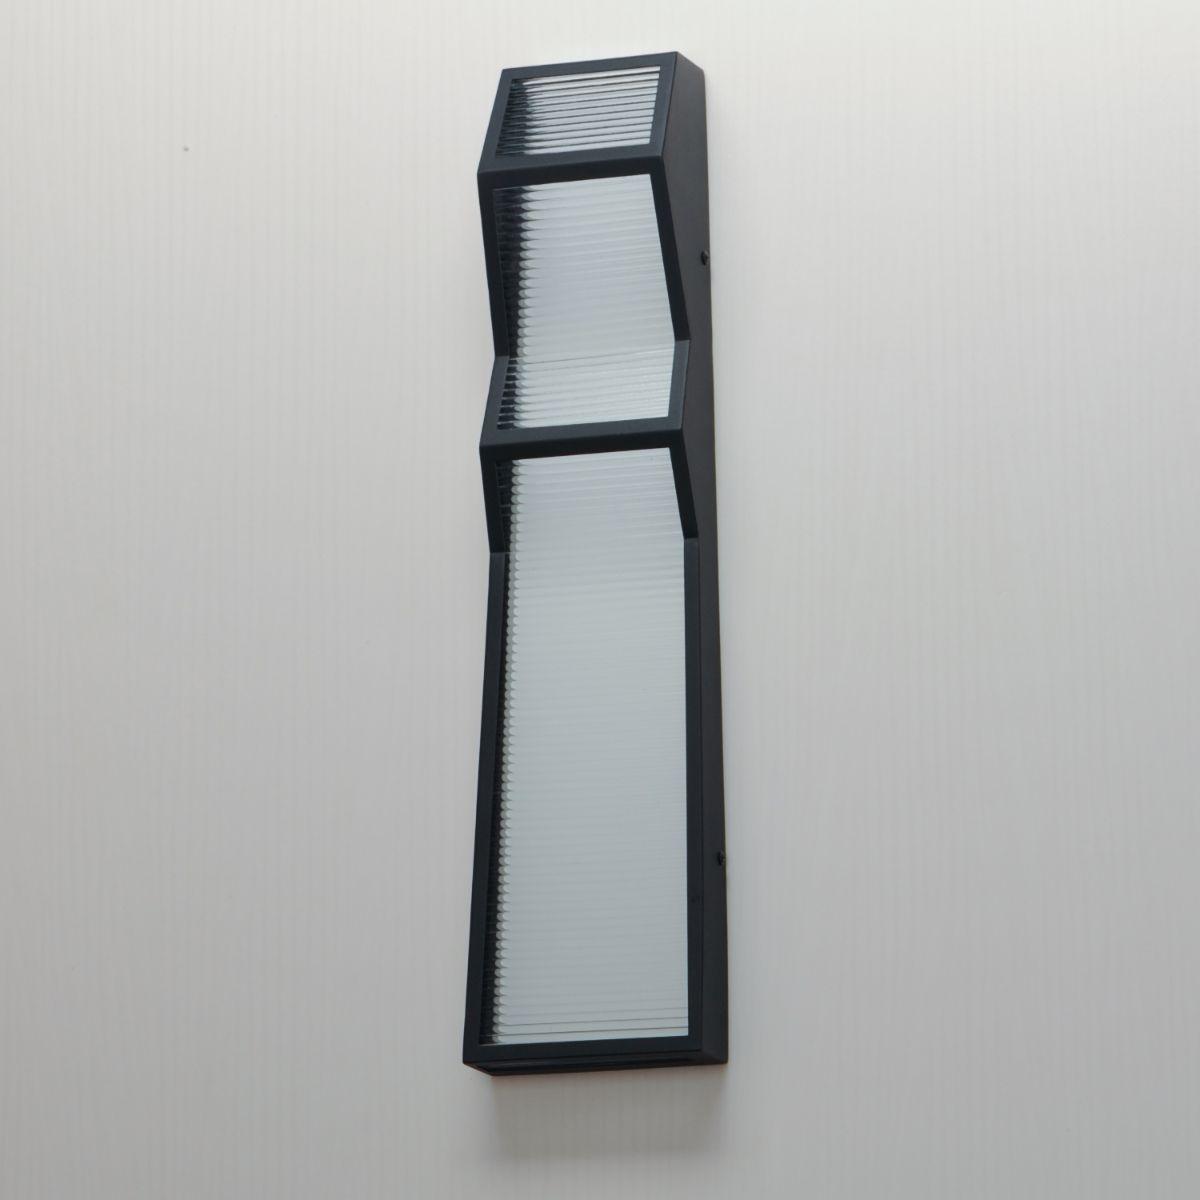 Totem 24 in. LED Outdoor Wall Sconce 3000K Black Finish